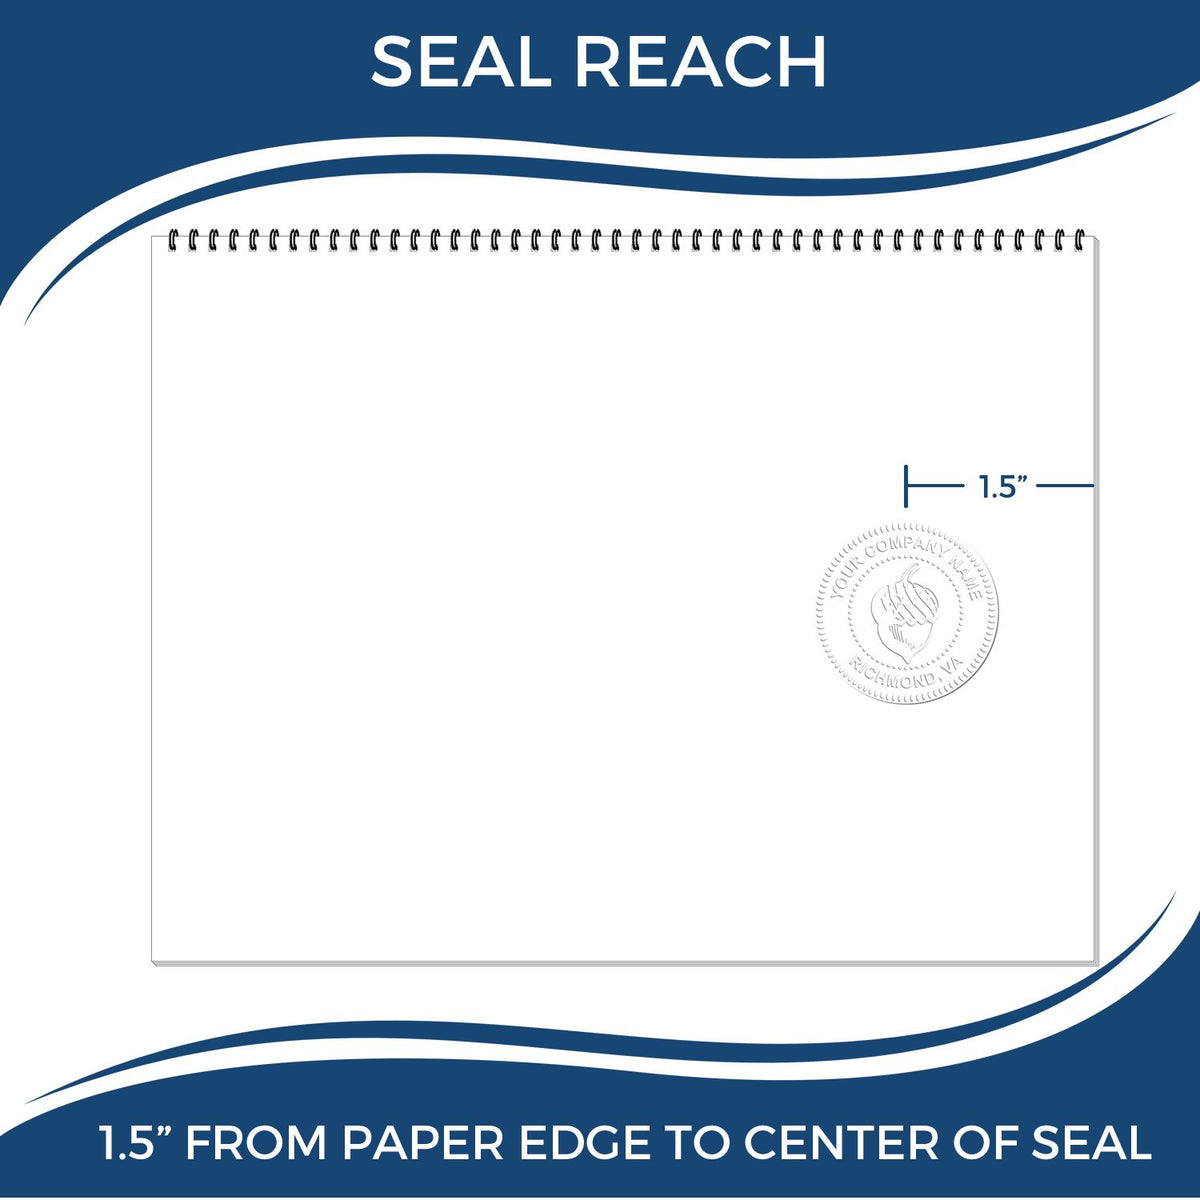 An infographic showing the seal reach which is represented by a ruler and a miniature seal image of the Soft Maryland Professional Engineer Seal